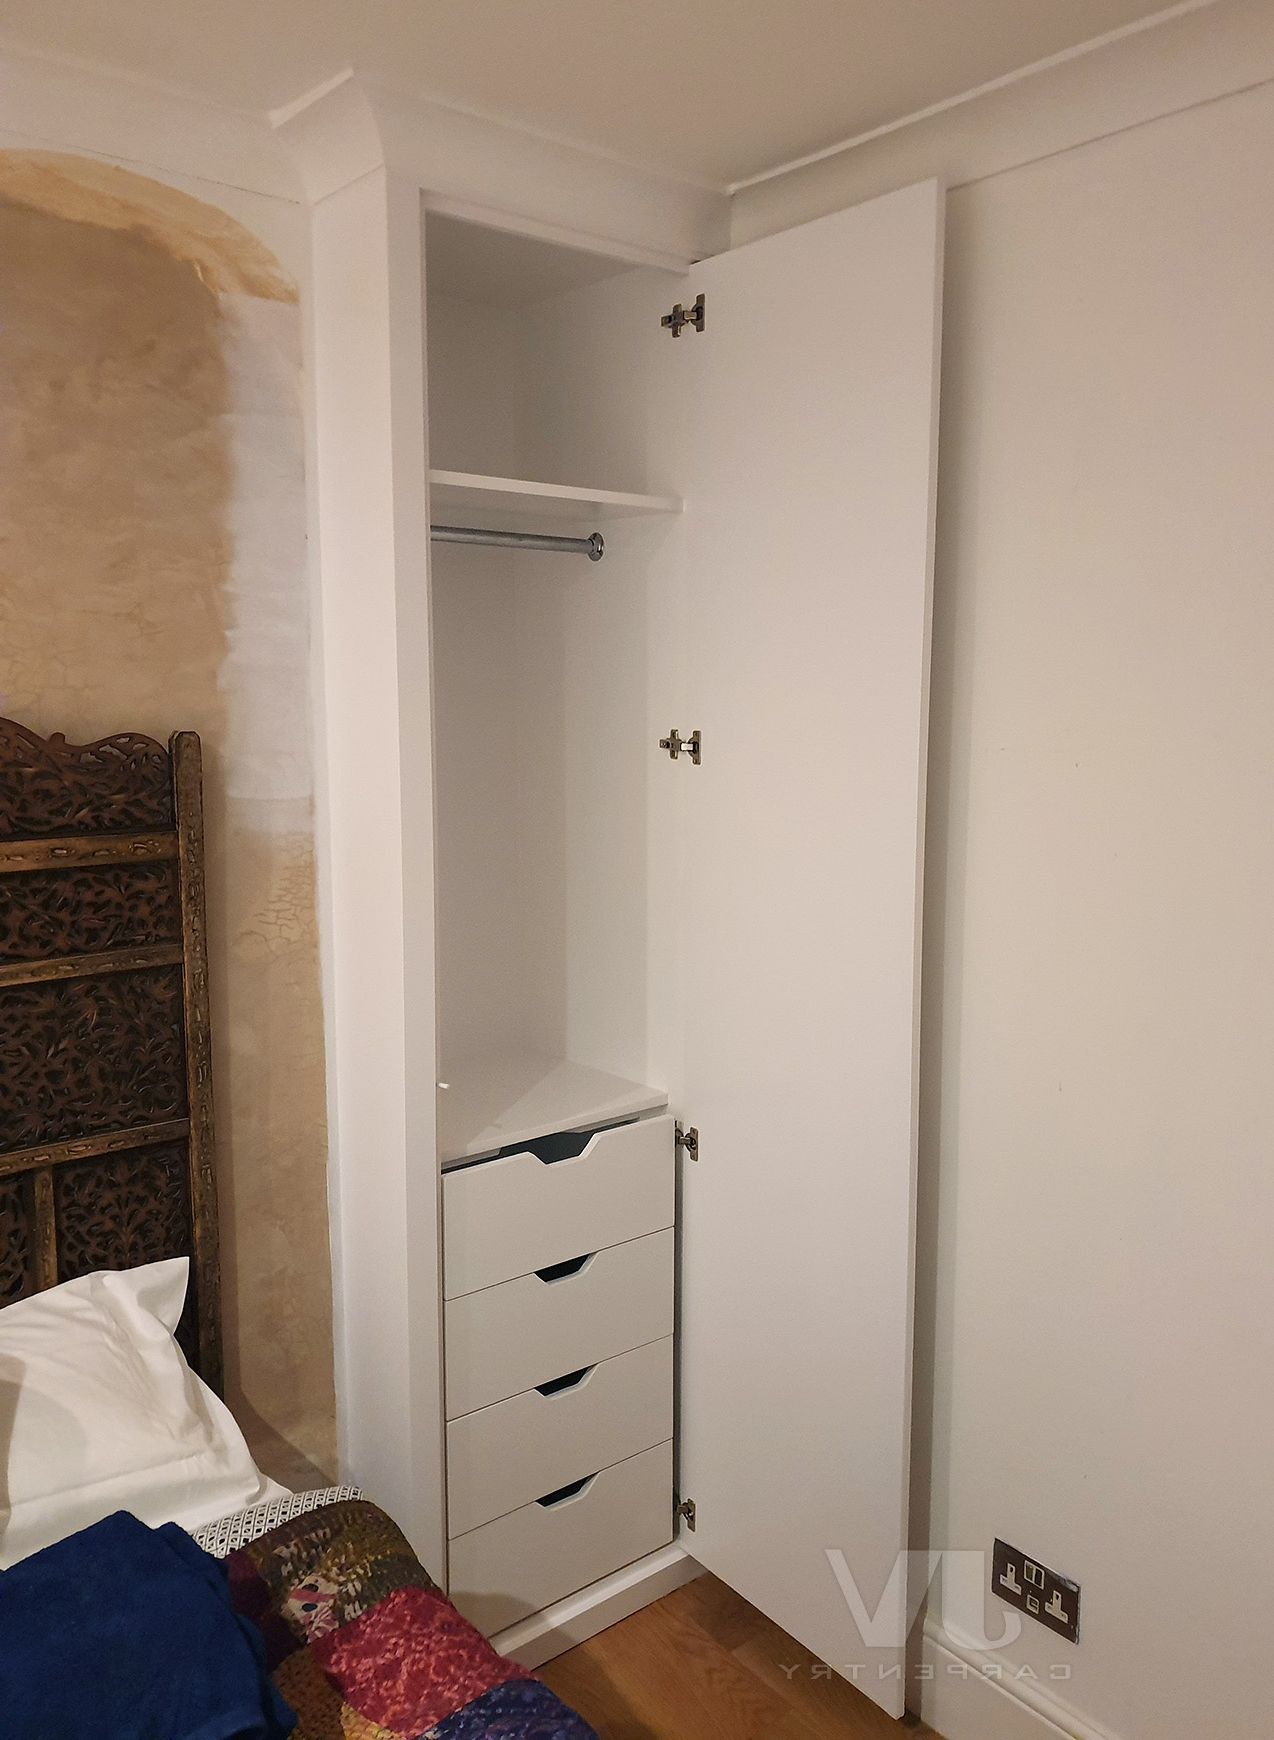 14 Fitted Wardrobe Ideas For A Small Bedroom | Jv Carpentry Throughout Small Single Wardrobes (Gallery 16 of 20)